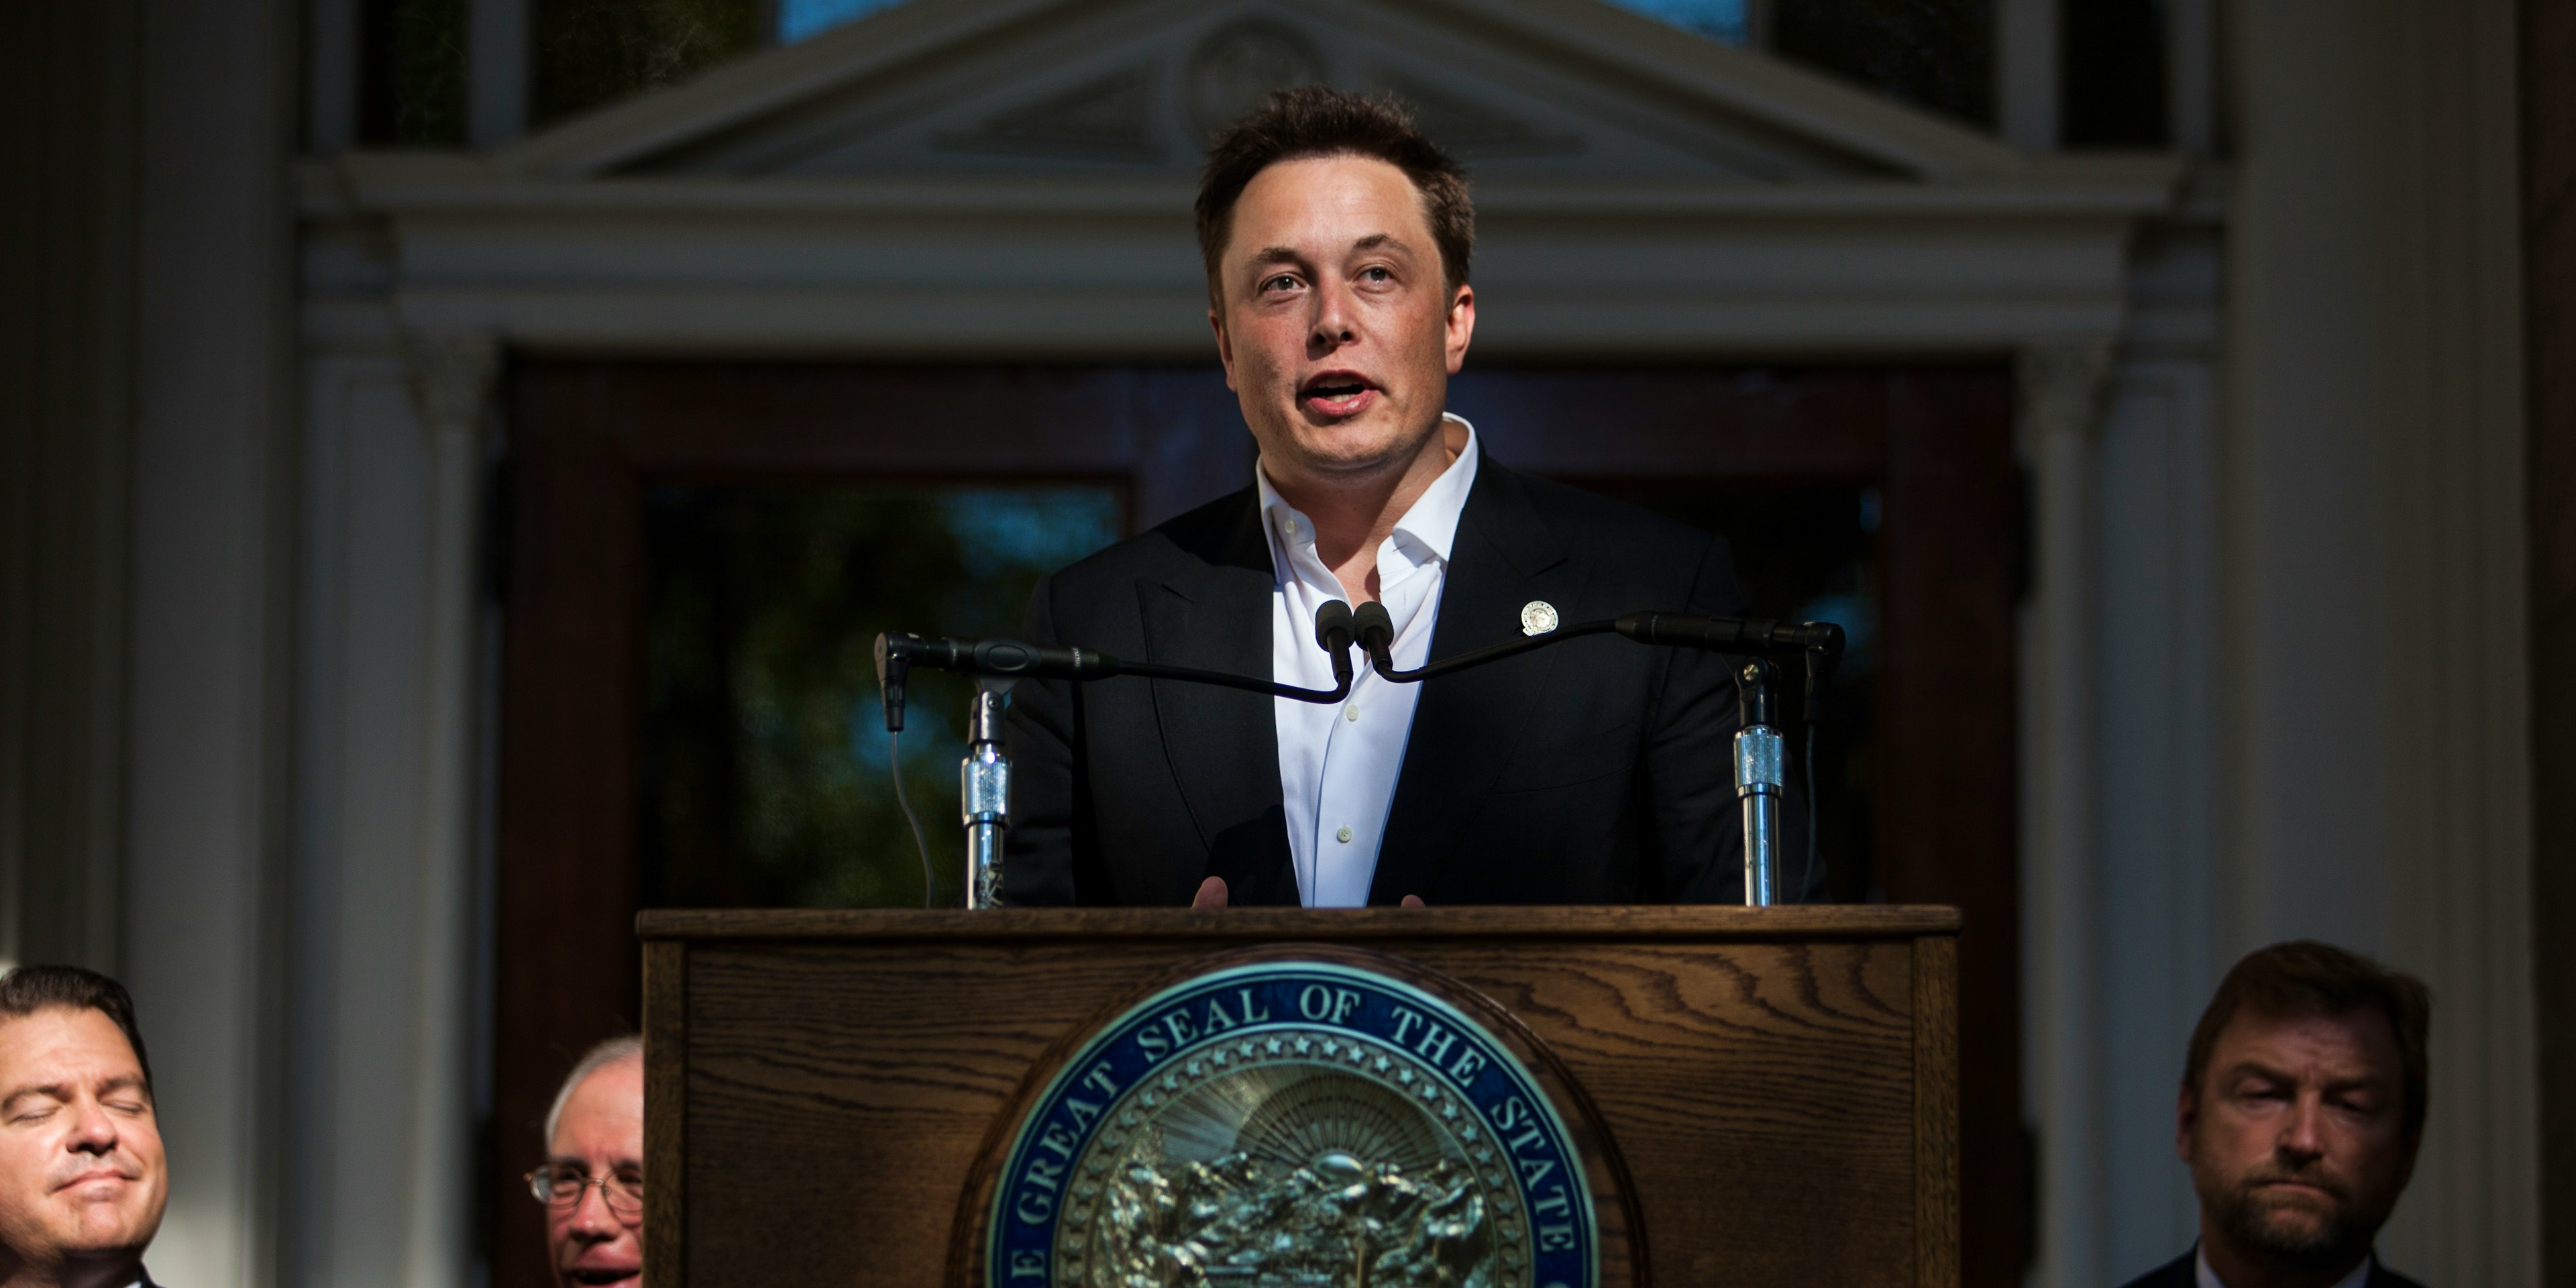 Nevada loves Musk, because the Gigafactory has already brough them $1.9 million just in the permit fees alone and will create 6,500 jobs.